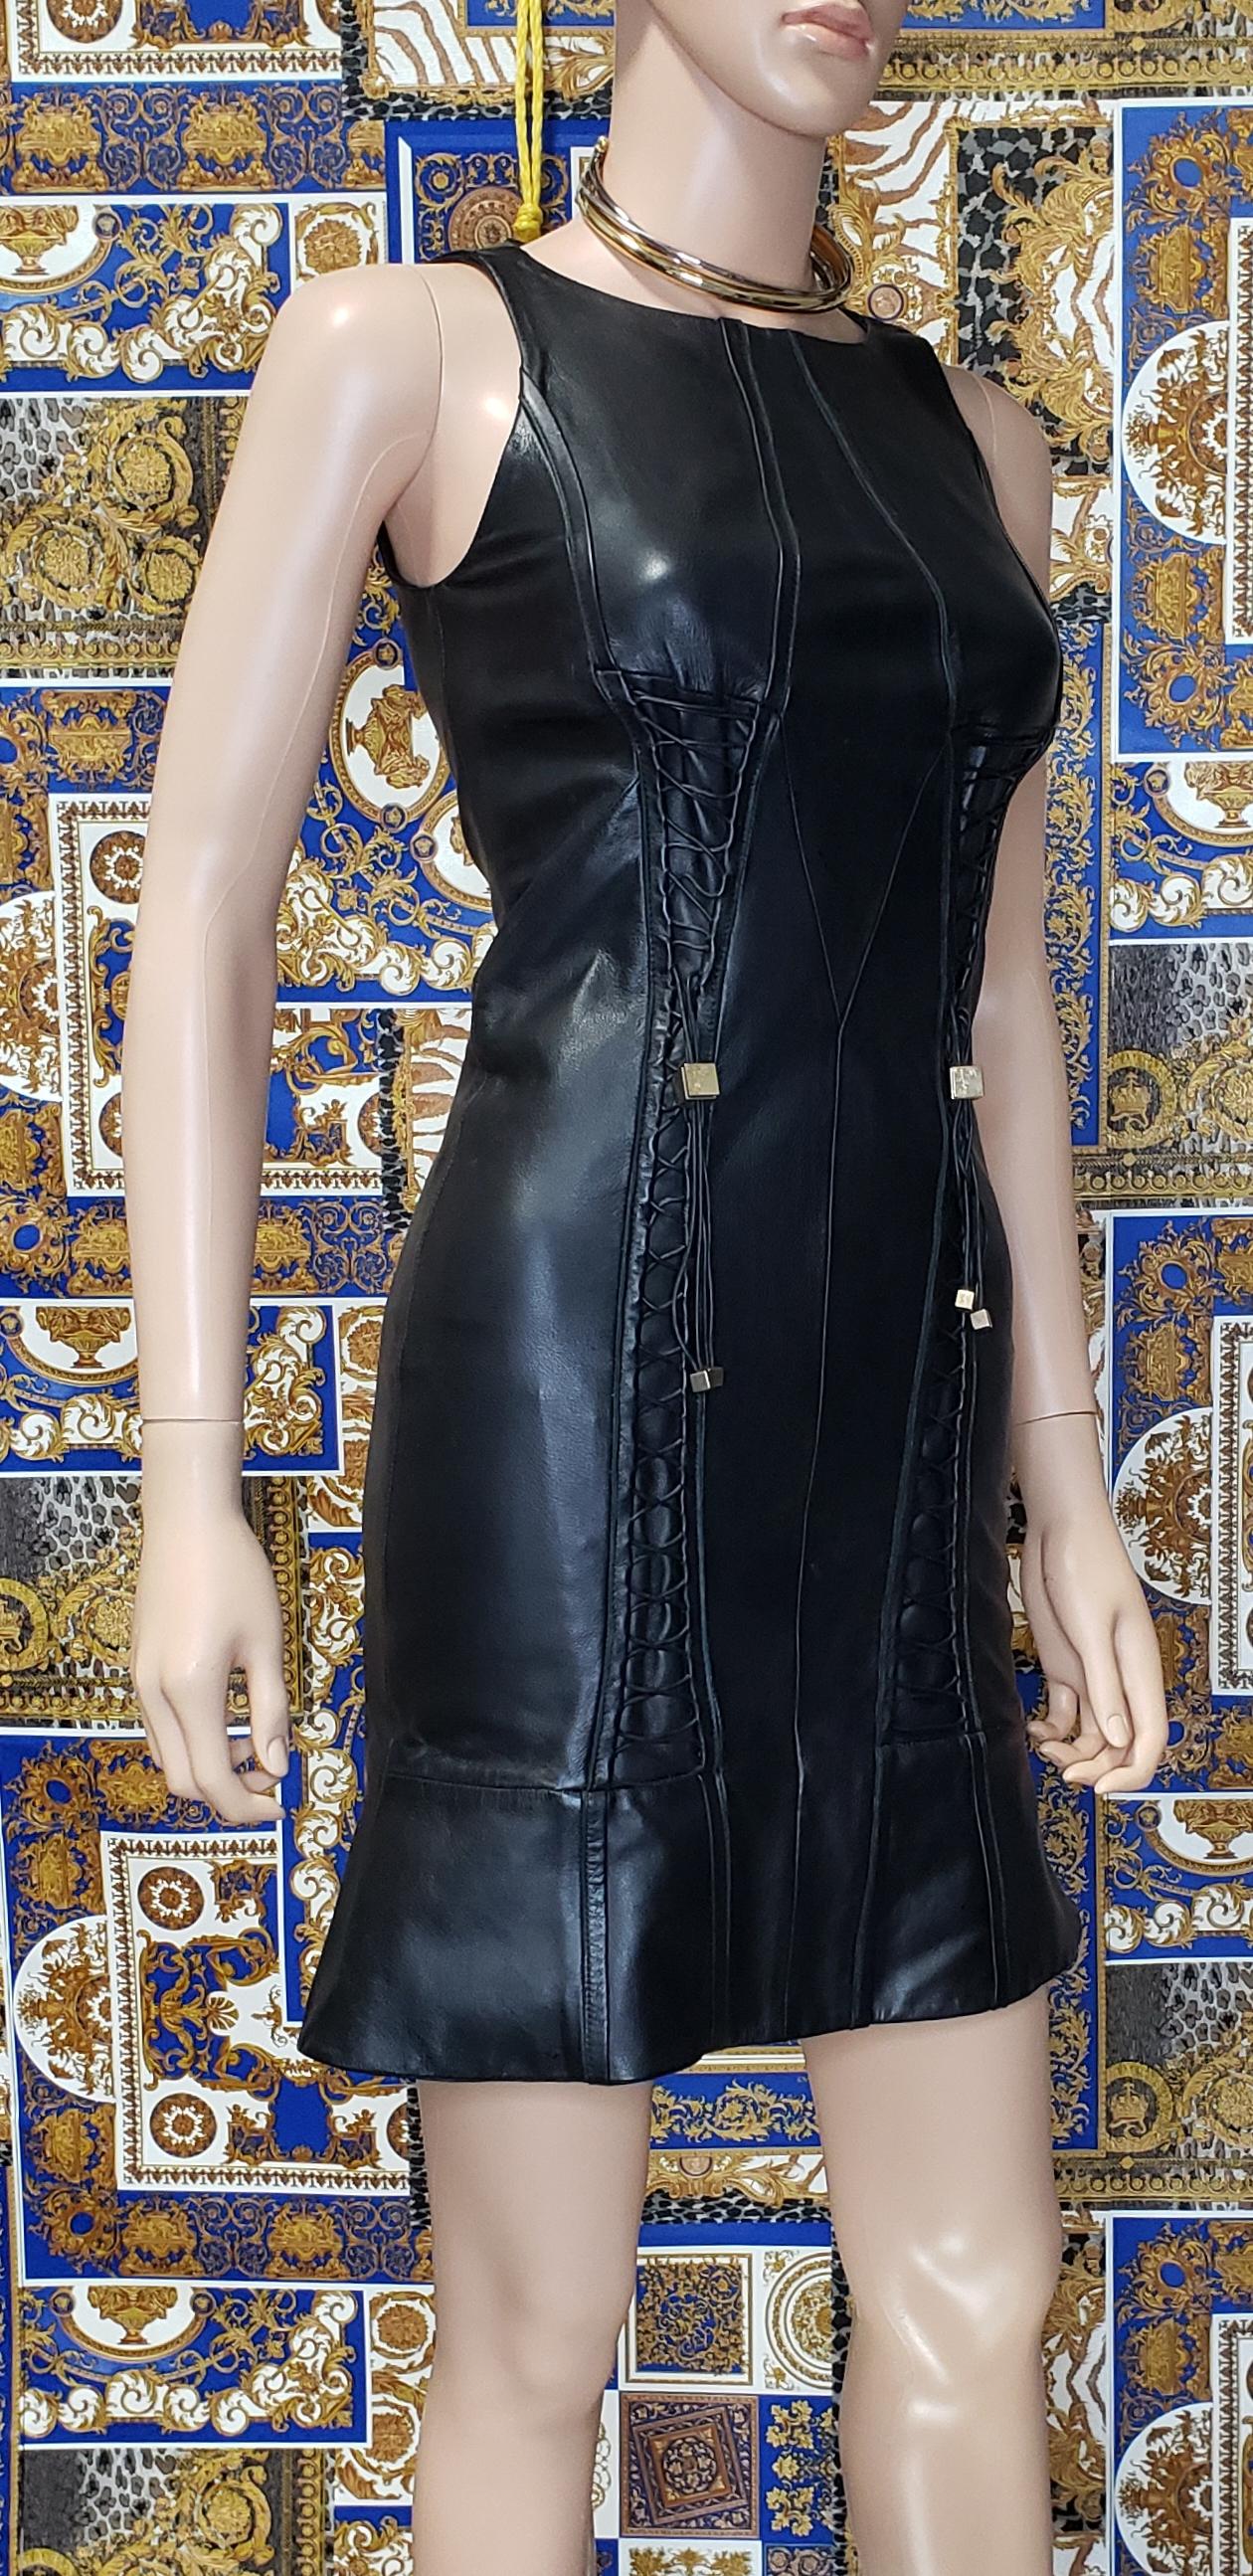 VERSACE COLLECTION BLACK LEATHER DRESS with TASSELS 38 - 4 1